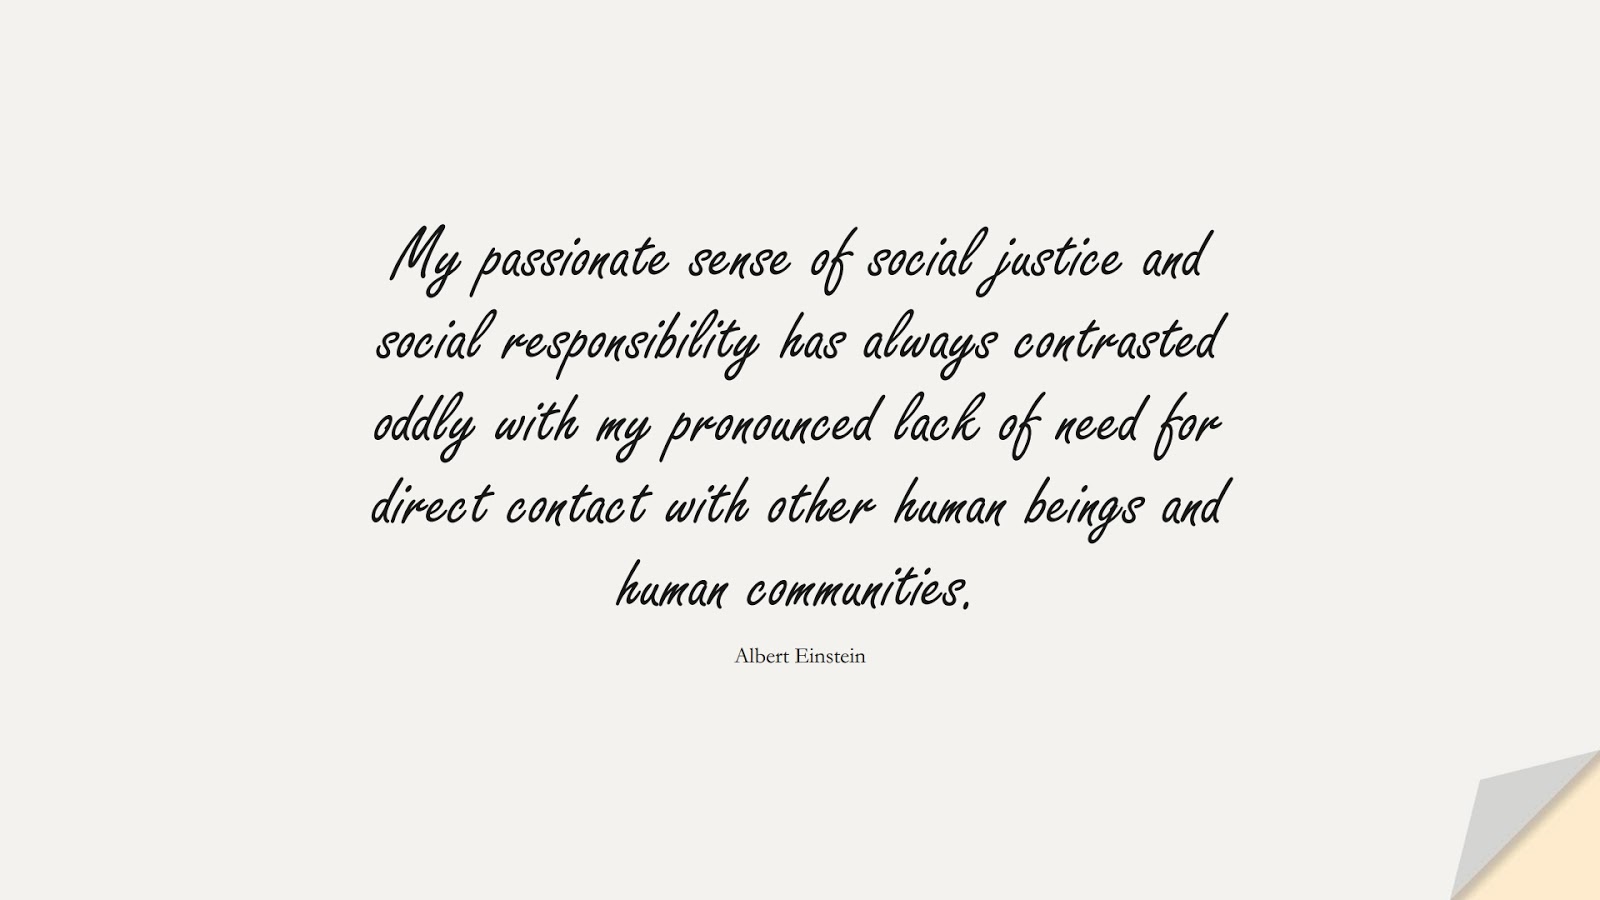 My passionate sense of social justice and social responsibility has always contrasted oddly with my pronounced lack of need for direct contact with other human beings and human communities. (Albert Einstein);  #HumanityQuotes